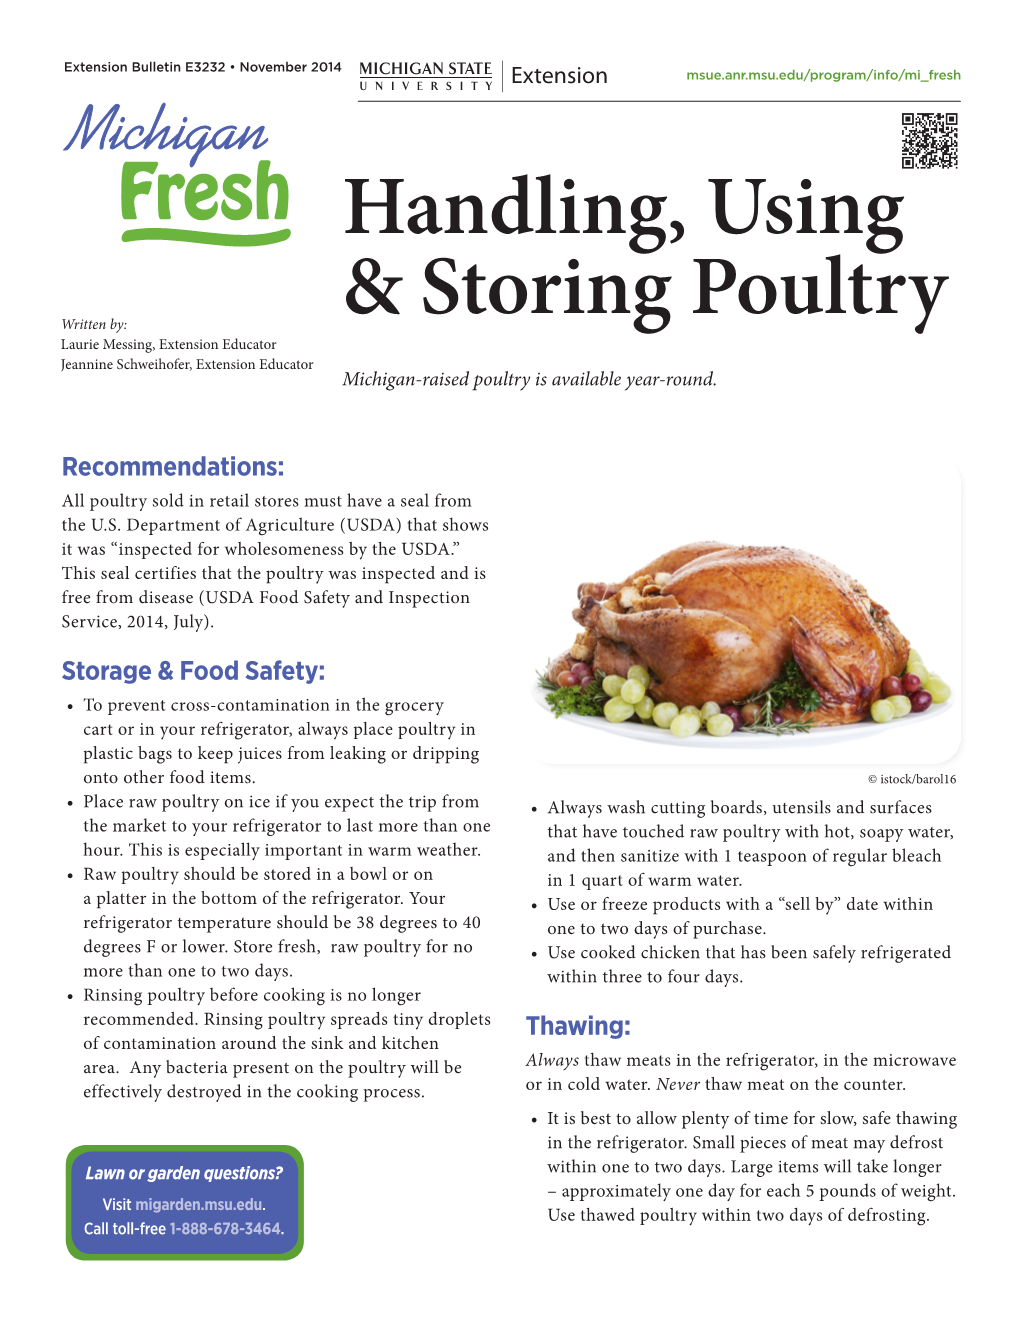 Handling, Using & Storing Poultry